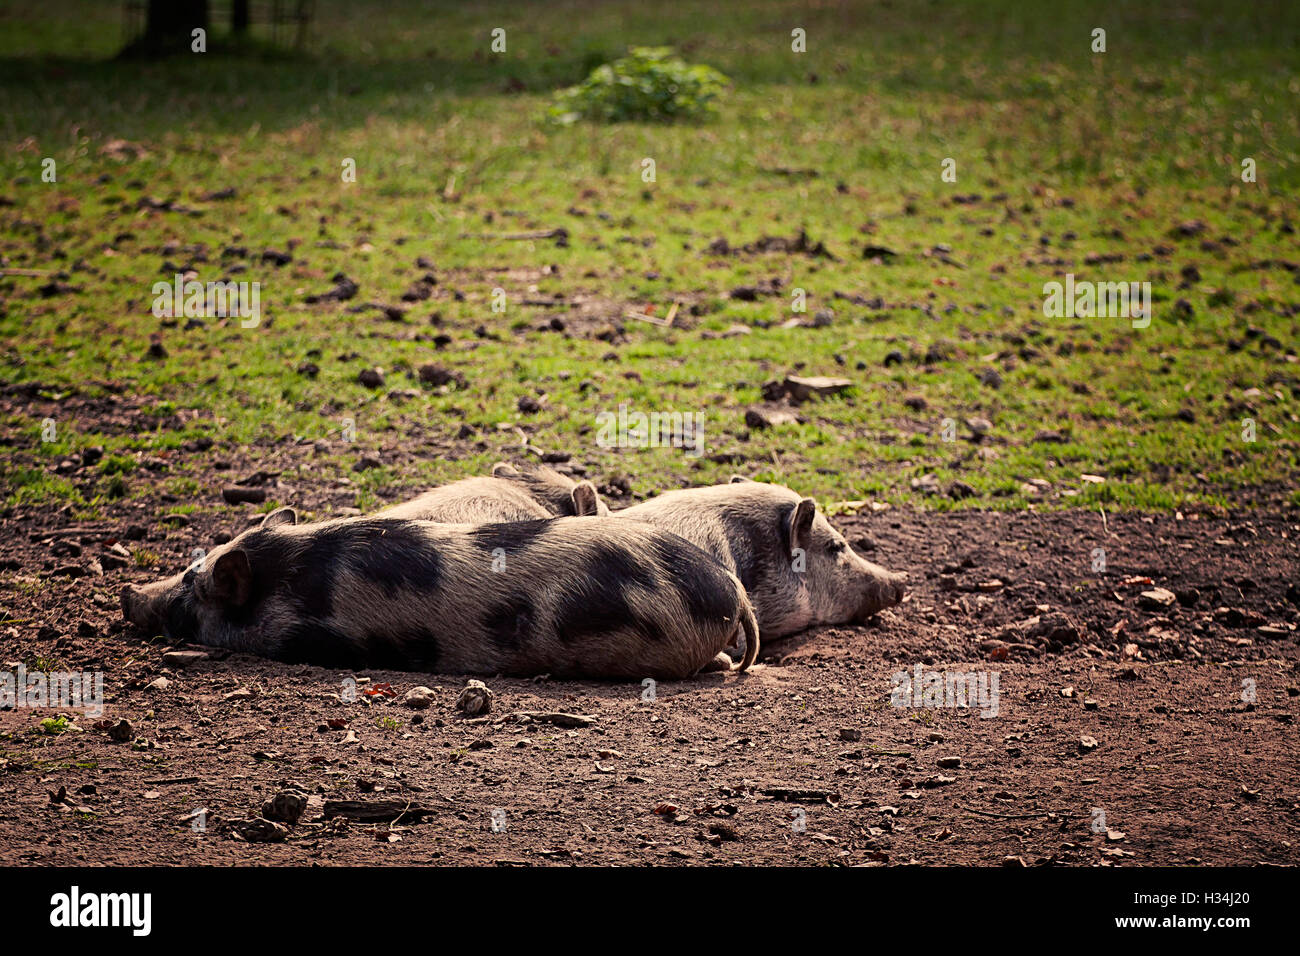 Three pot-bellied pigs resting in field. They are farmyard pigs descending from wild boars, smaller than standard Stock Photo